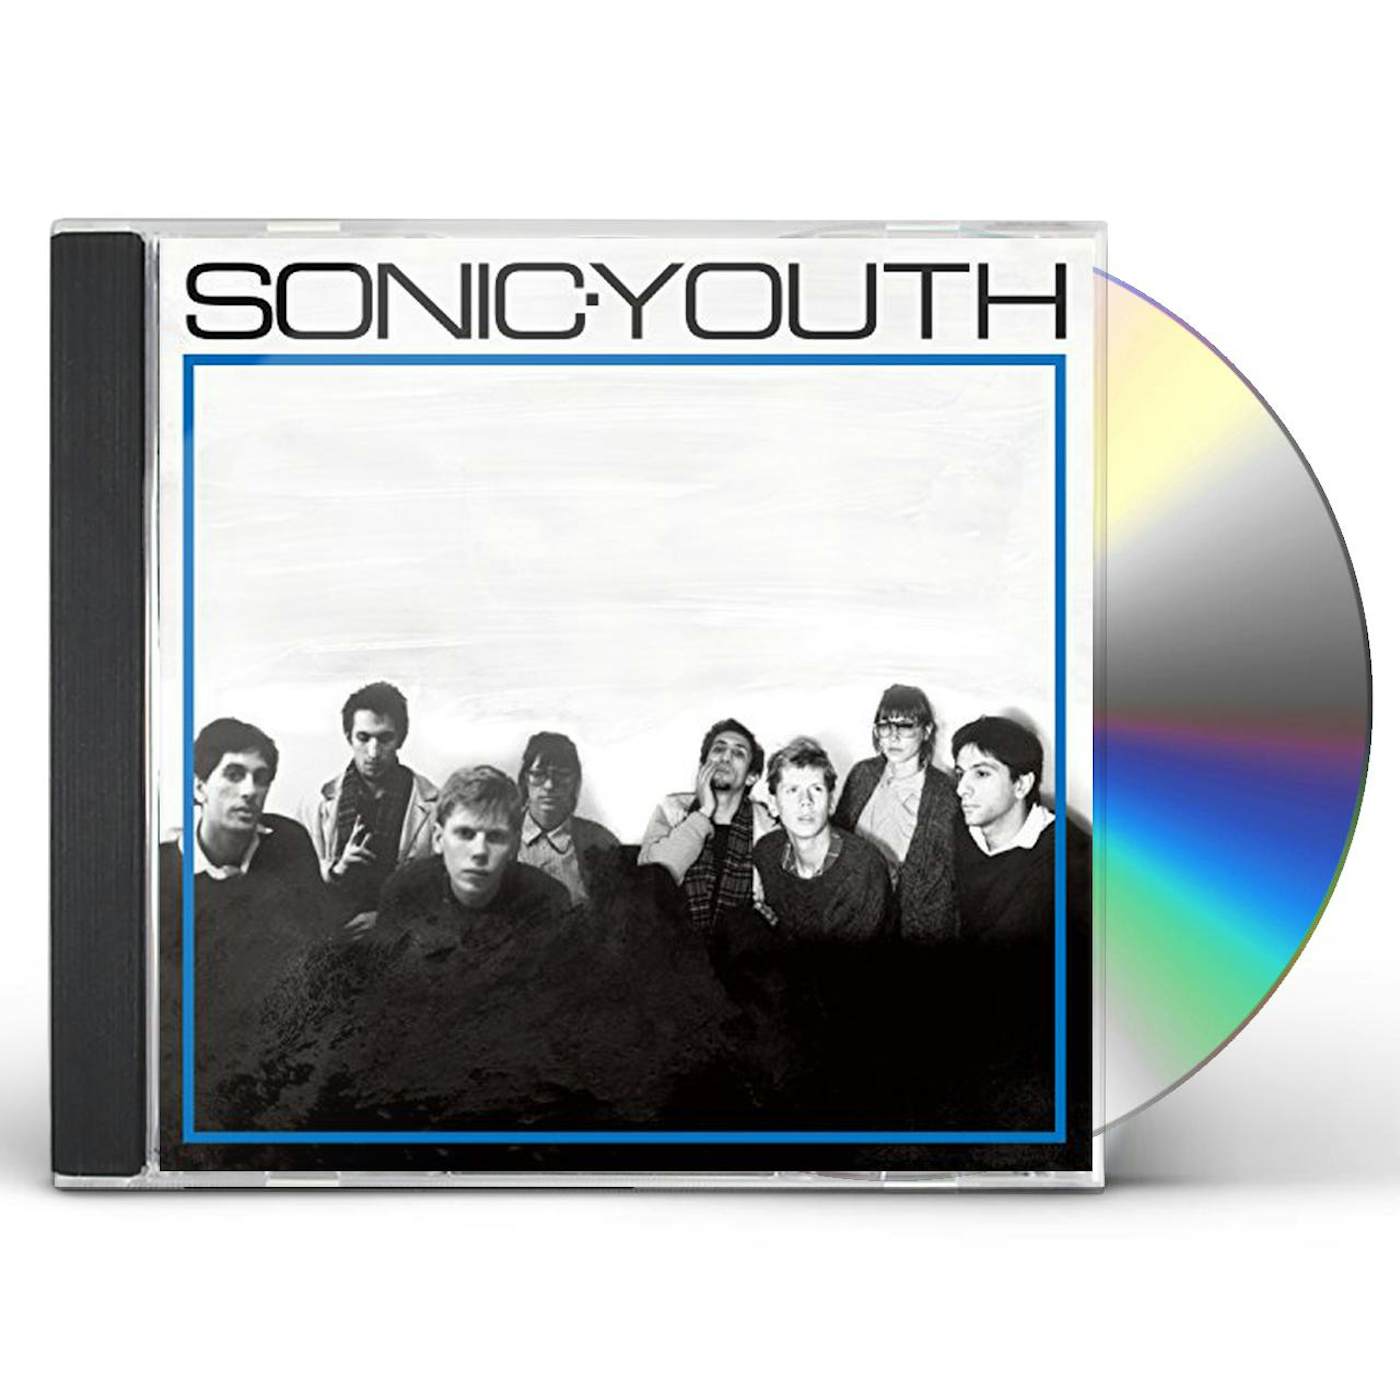 SONIC YOUTH CD